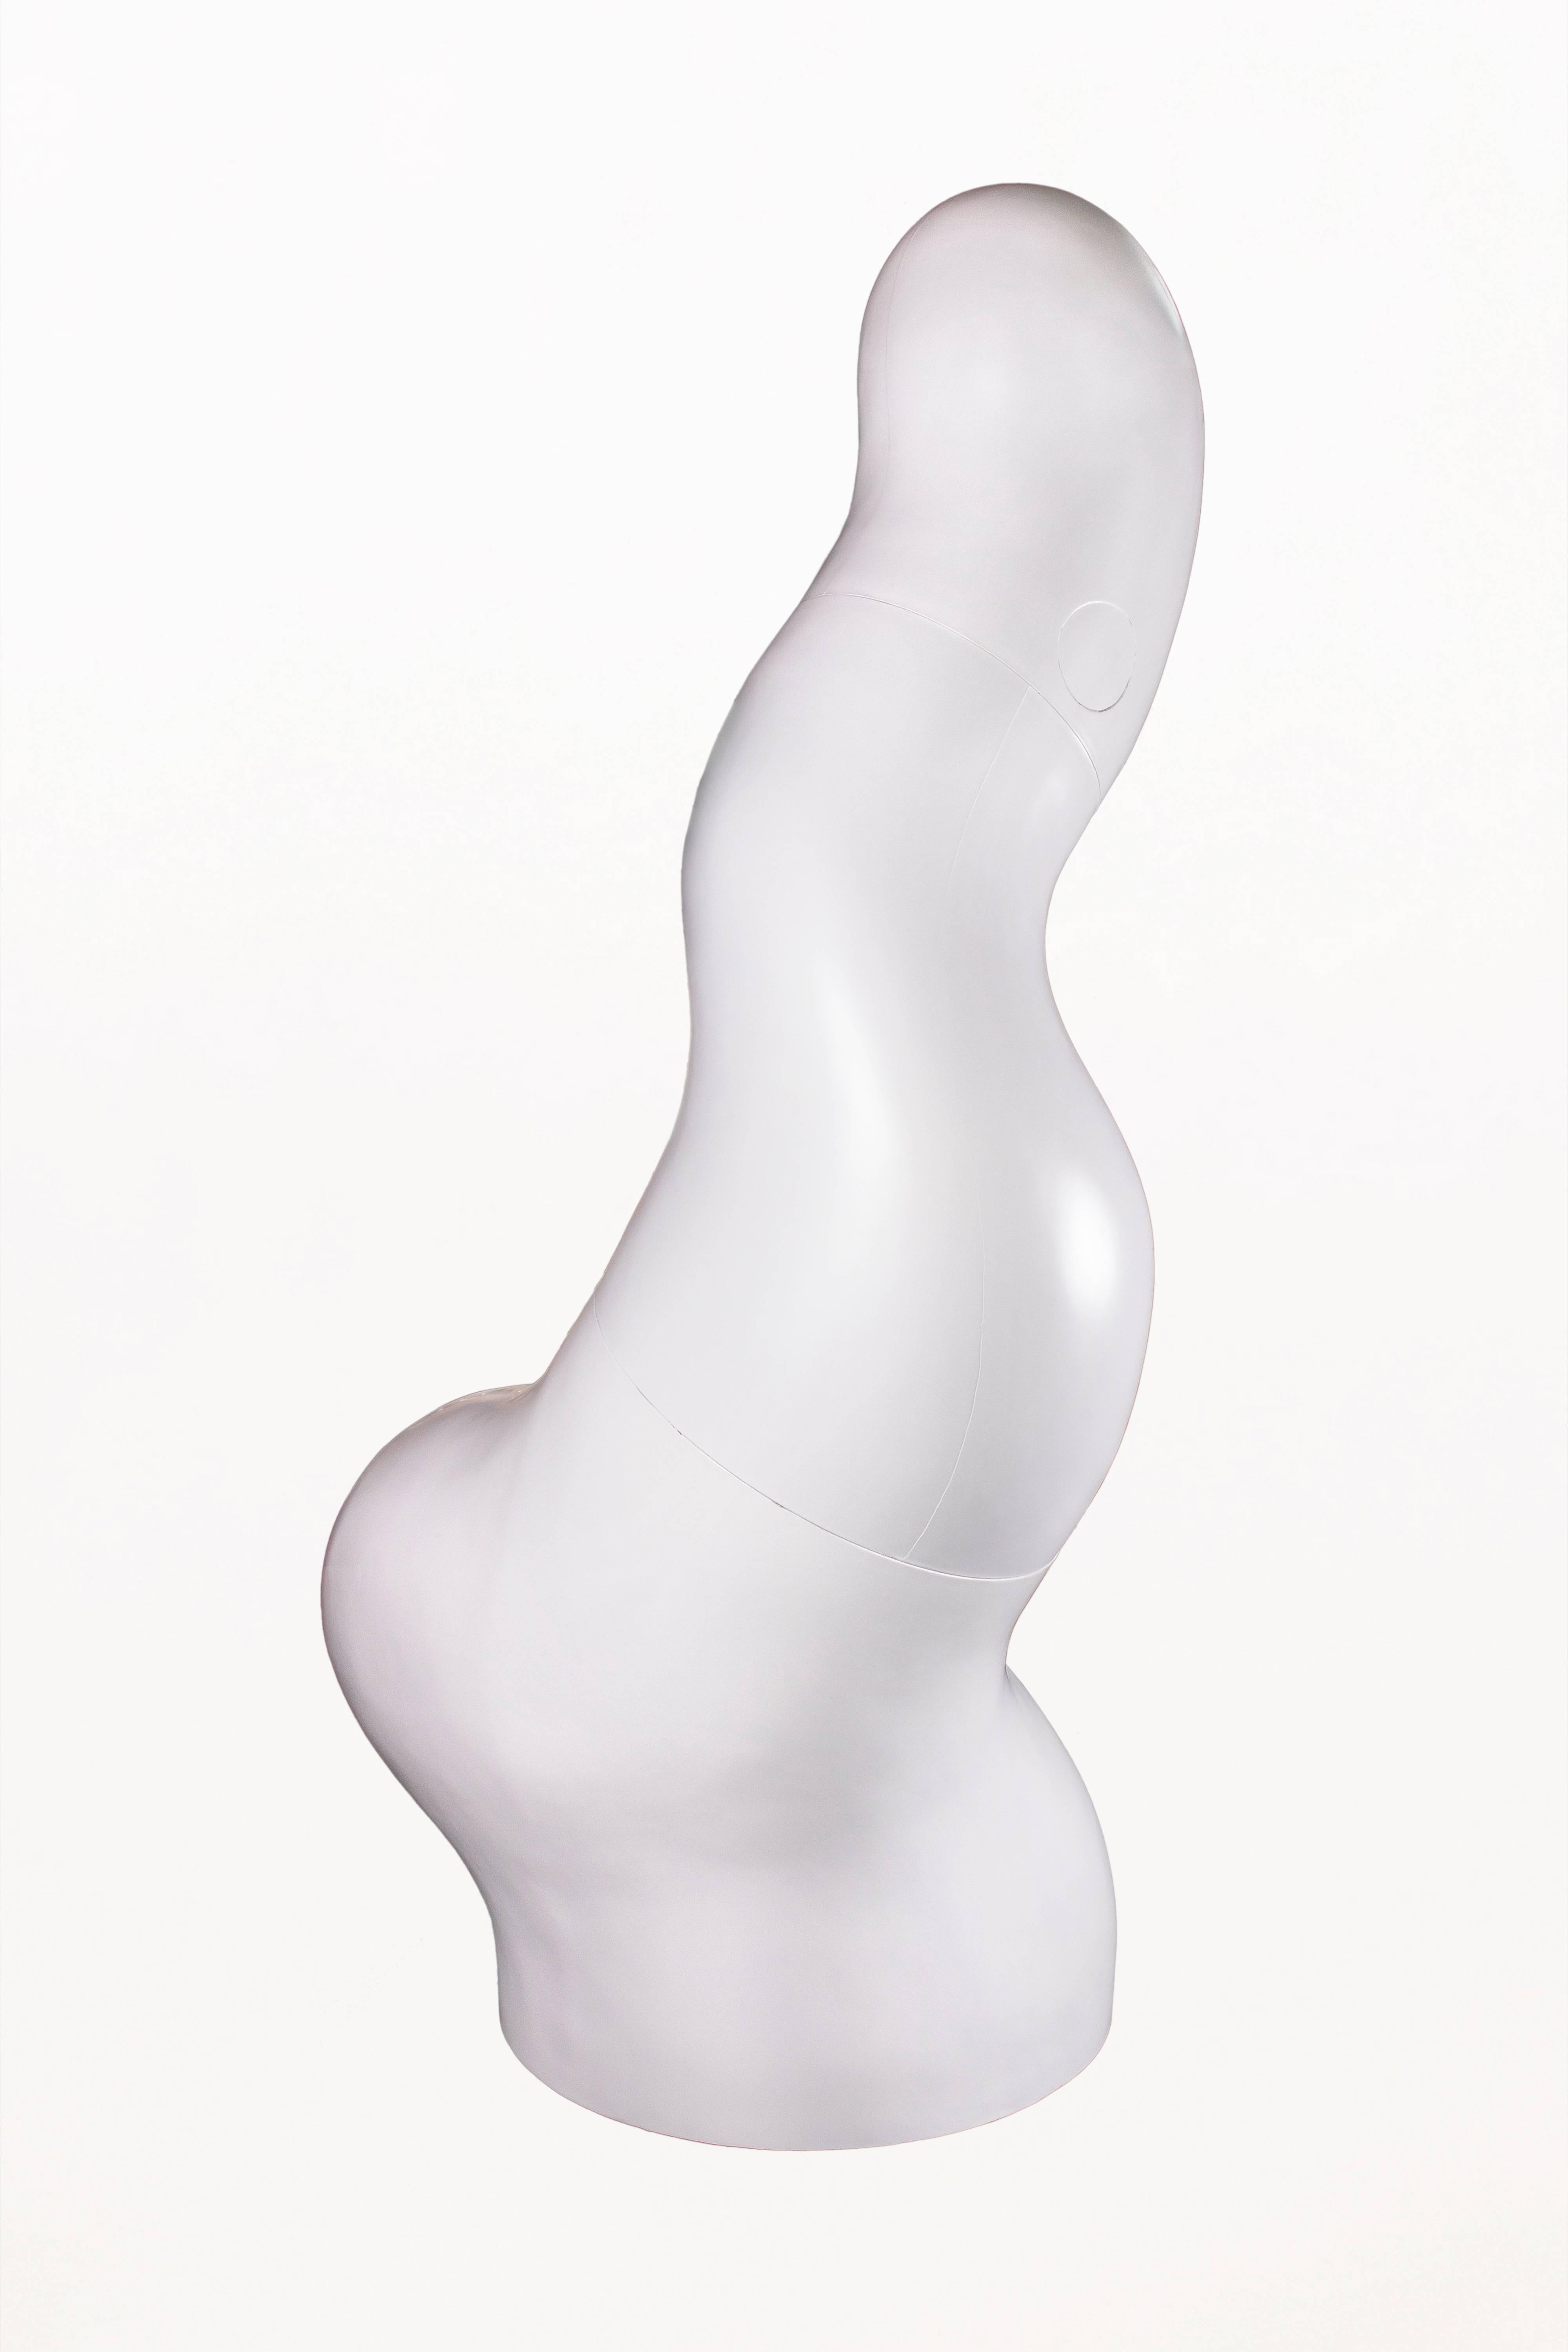 Mid-Century Modern White Lacquered Polymorphic Sculpture by Les Simonnet, circa 1968, France